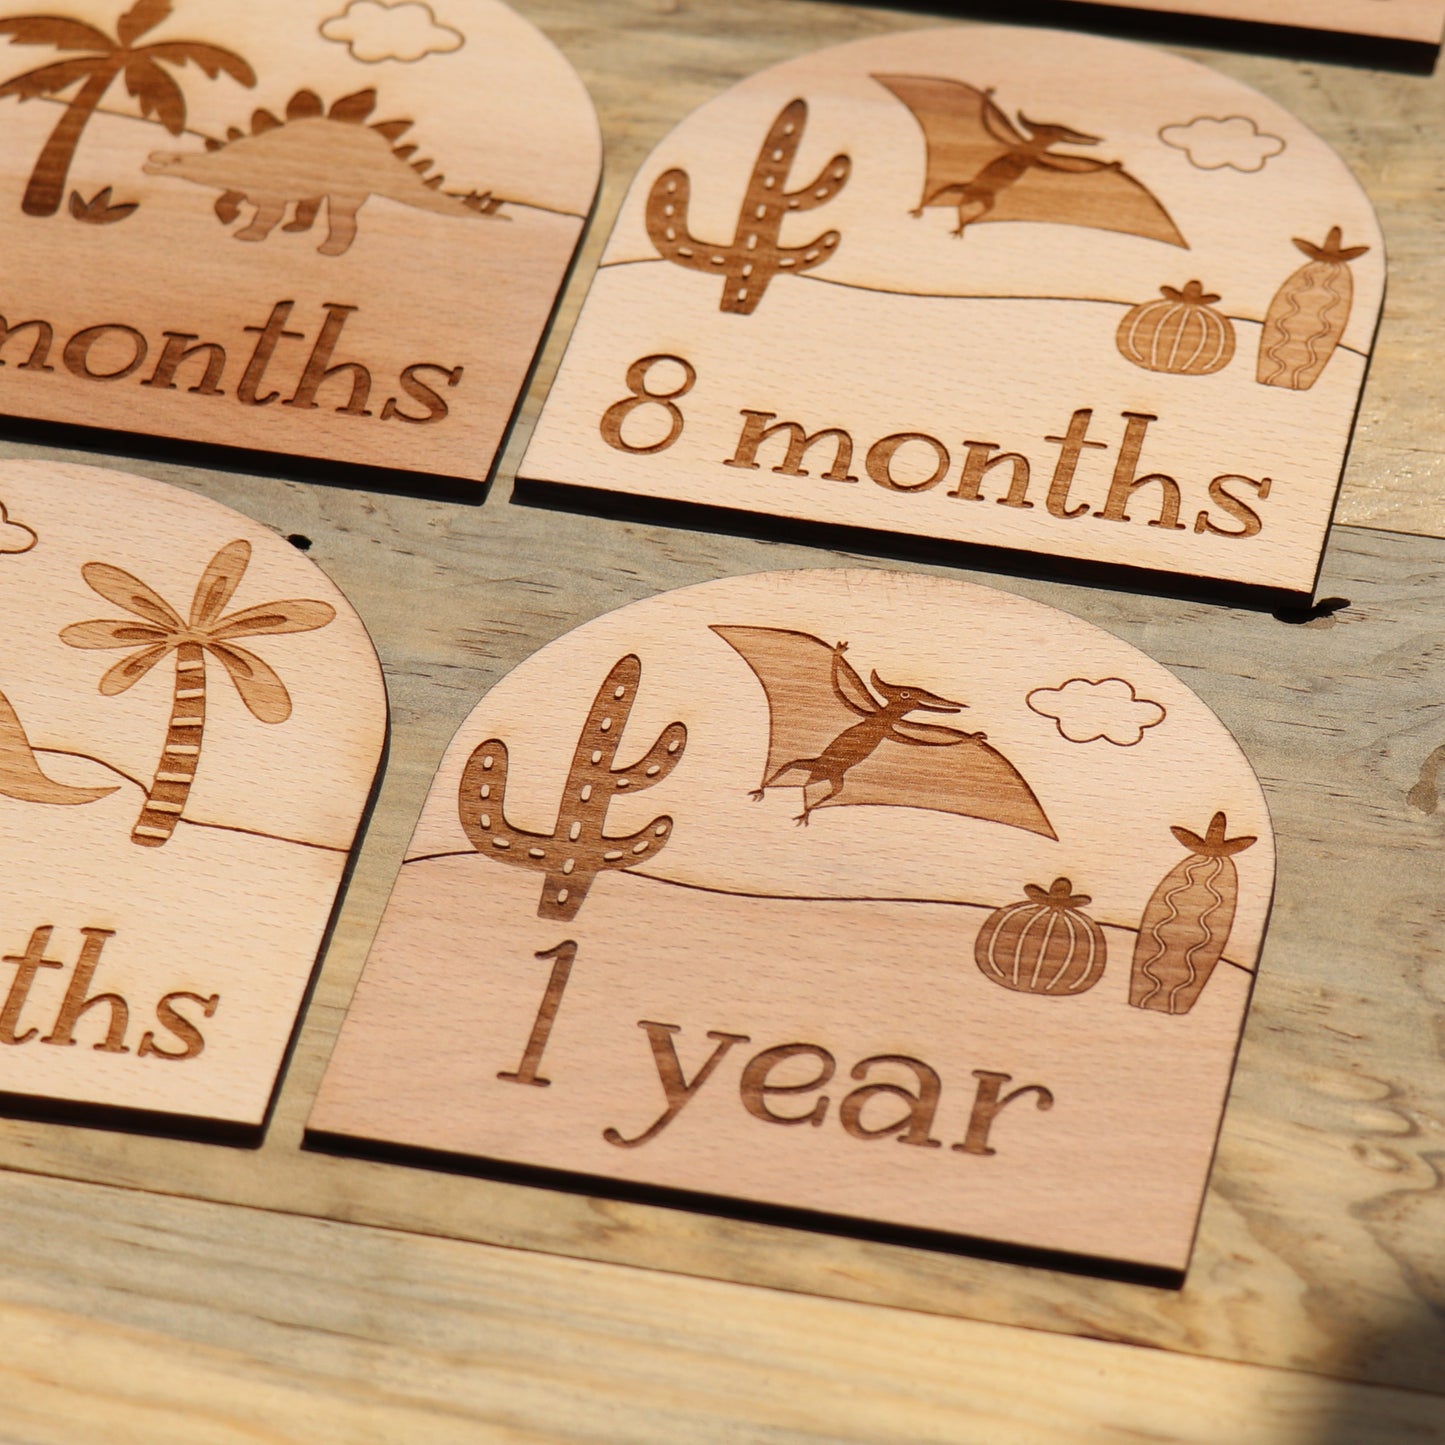 Dinosaurs - Baby's Monthly Wood Milestone Markers